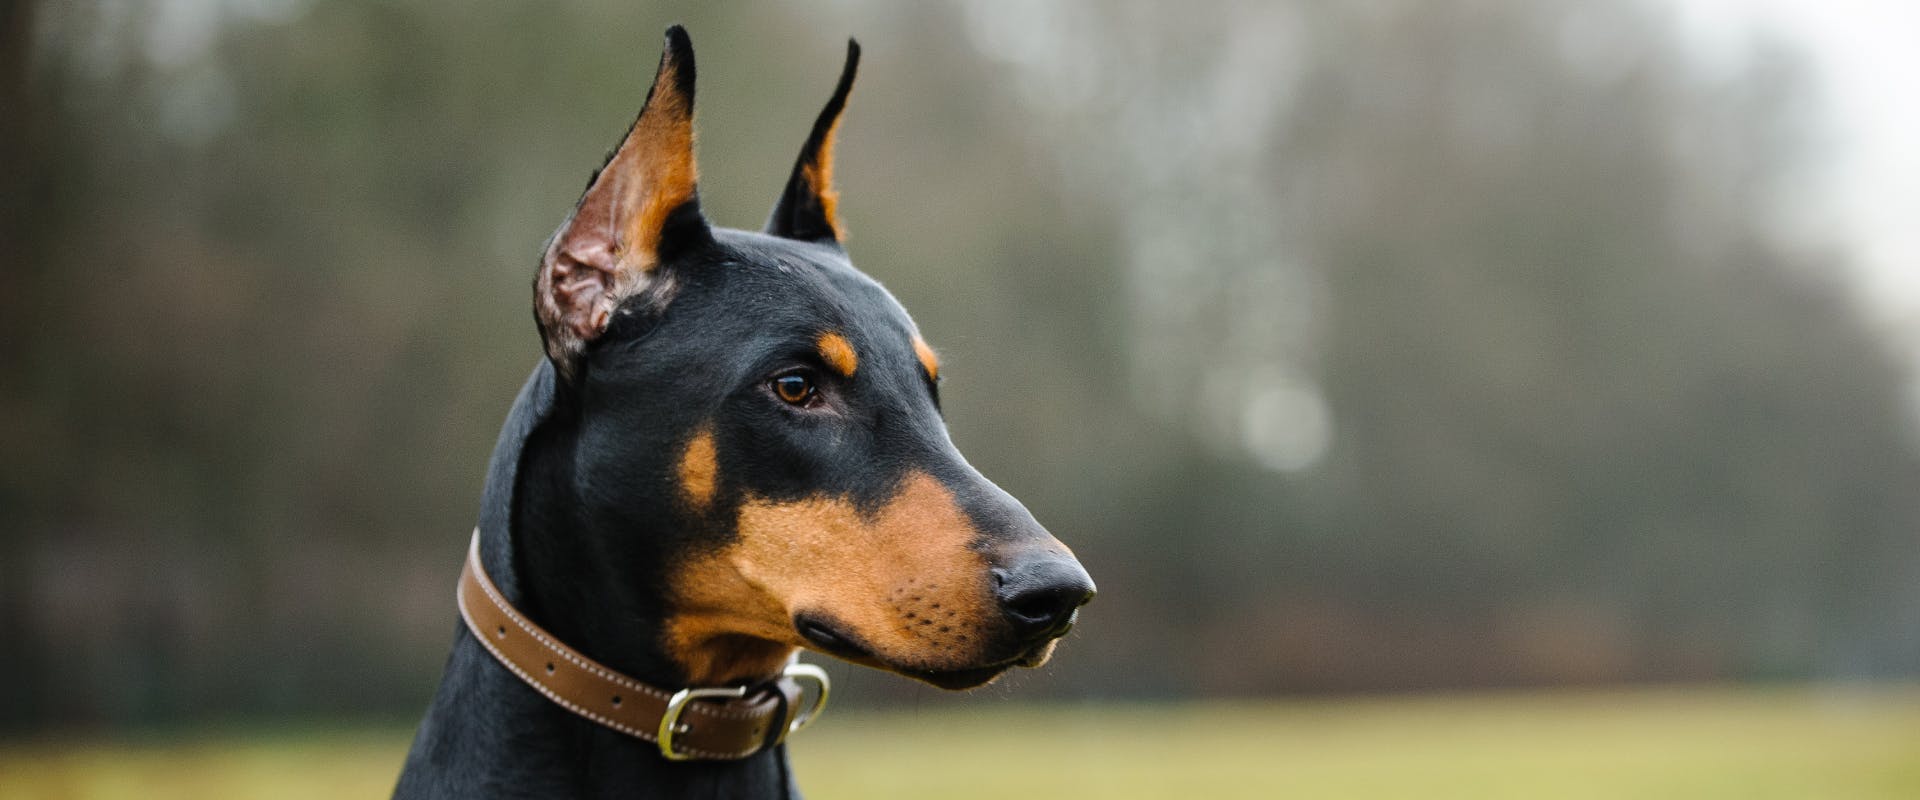 doberman sitting in a park with a brown collar on